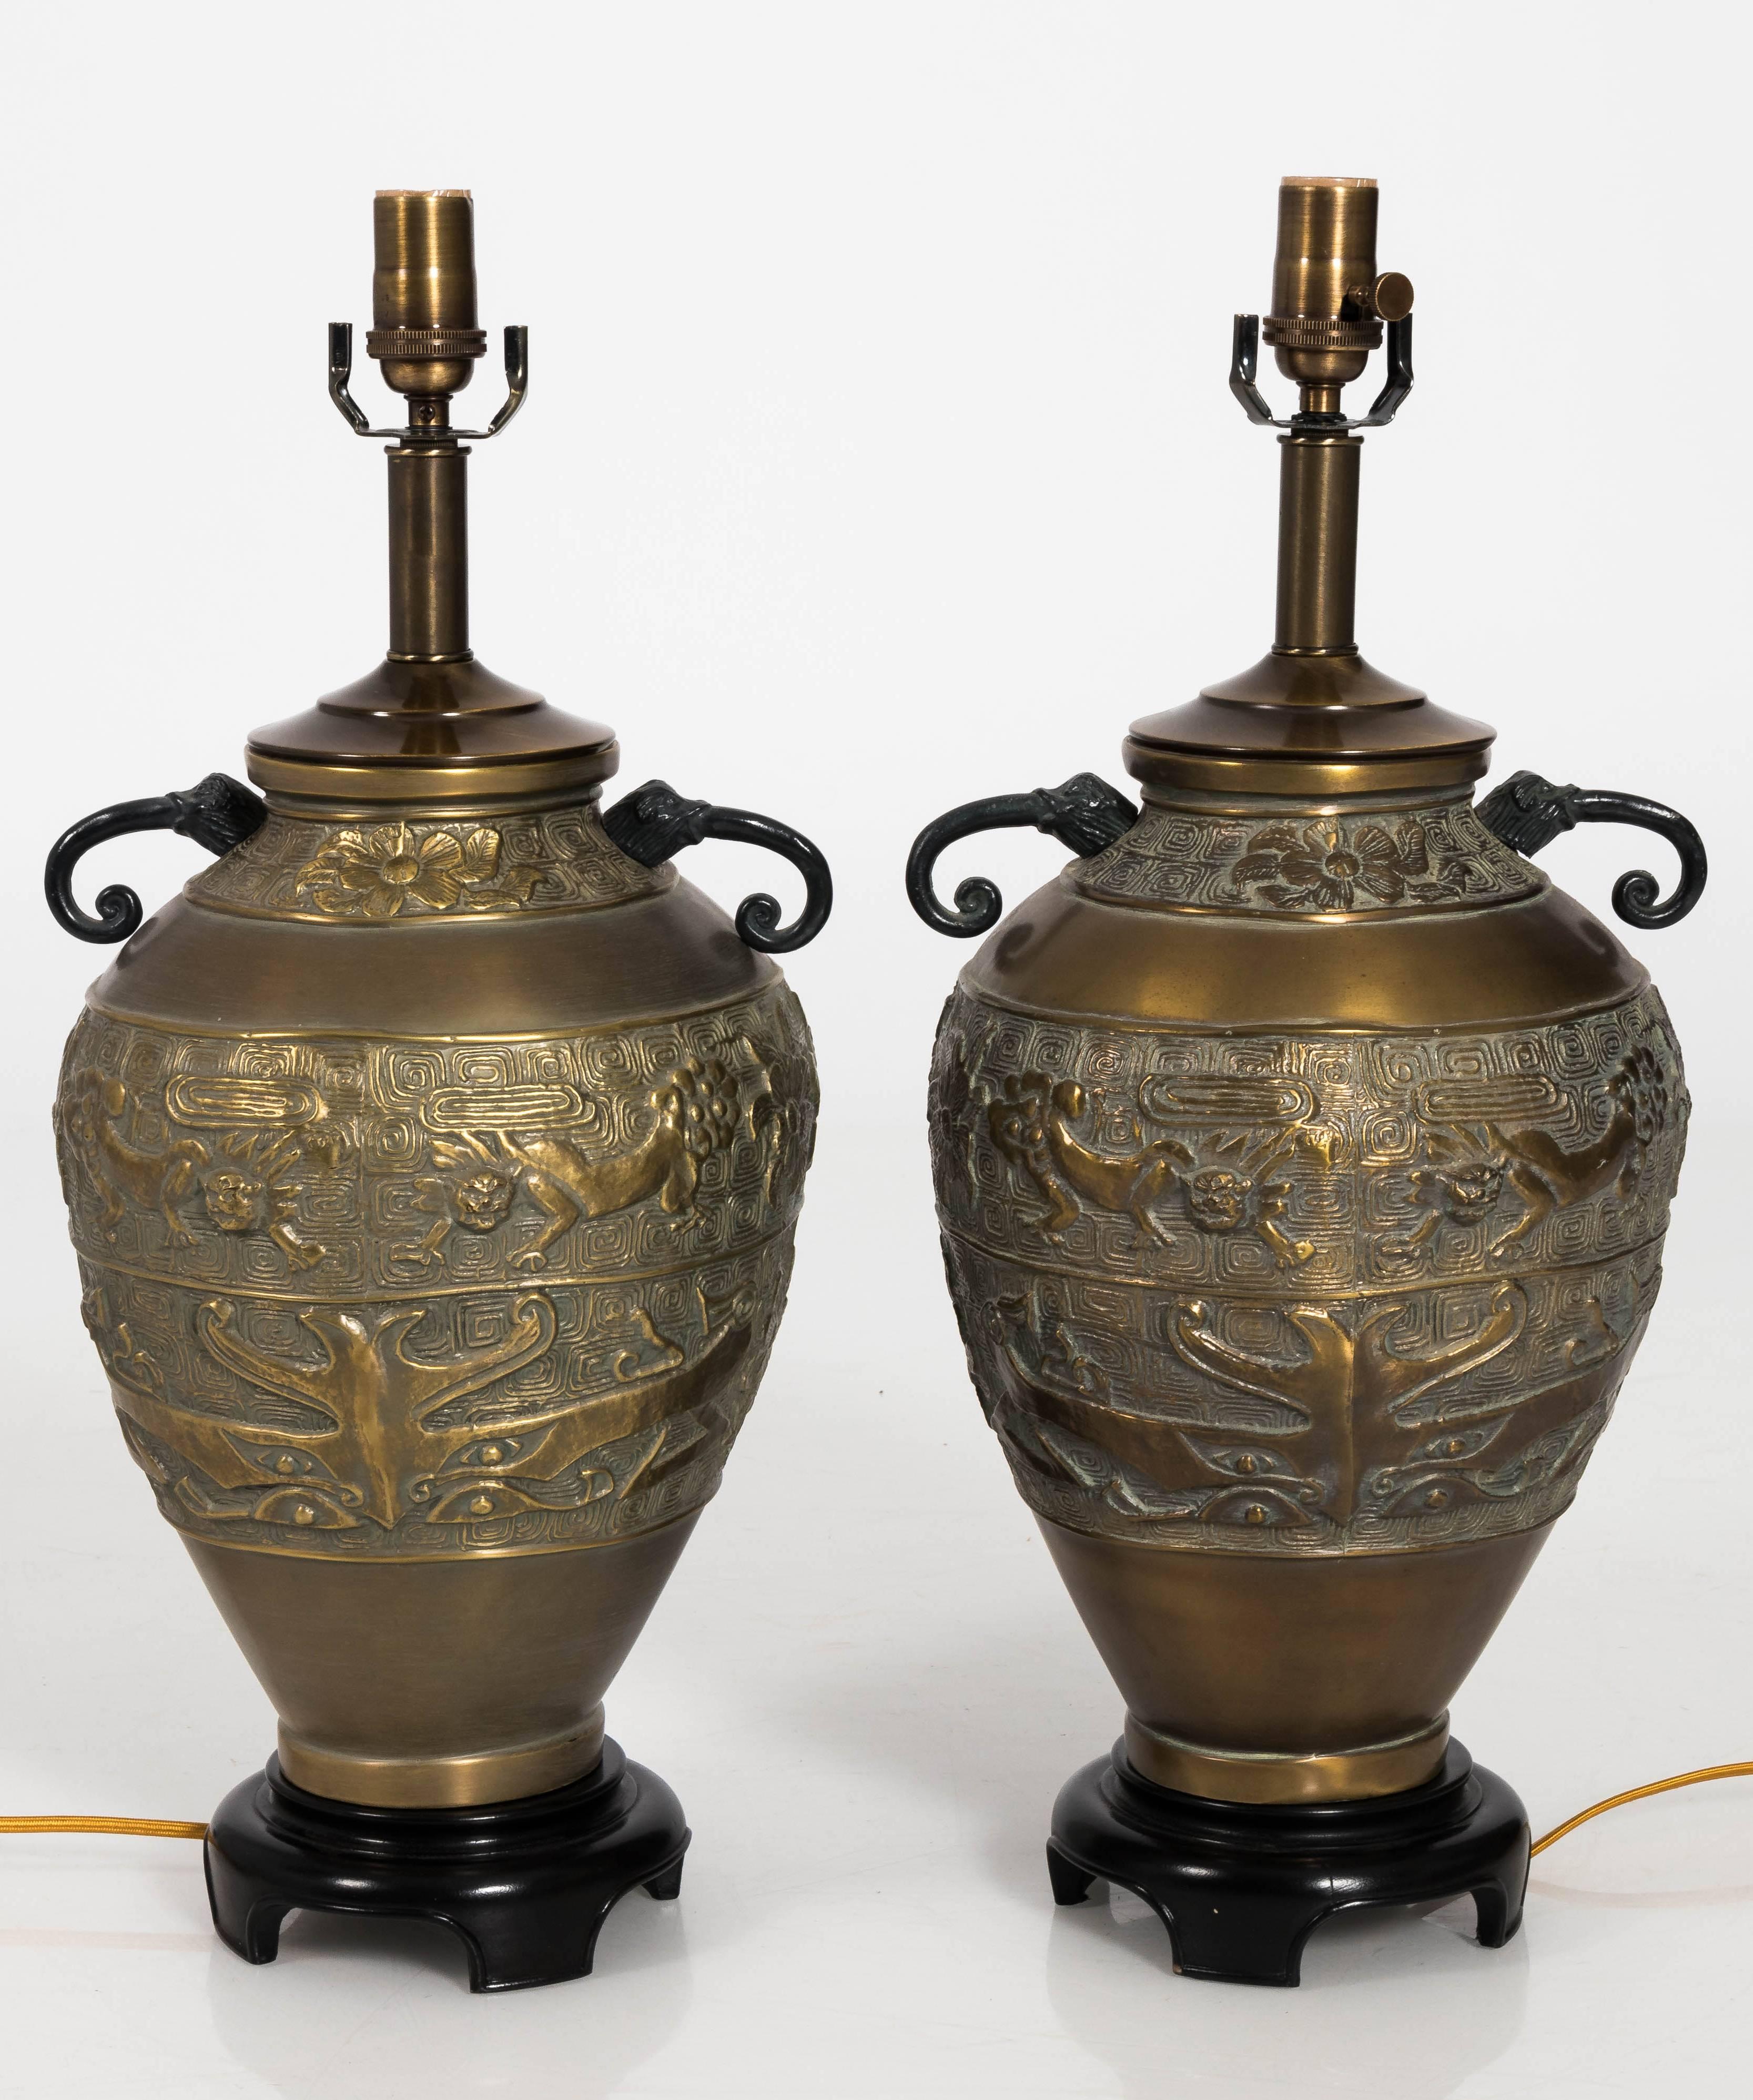 Pair of Asian influenced hammered brass table lamps. Painted black wood bases. Newly rewired. Each lamp takes one standard bulb. Lampshades not included.